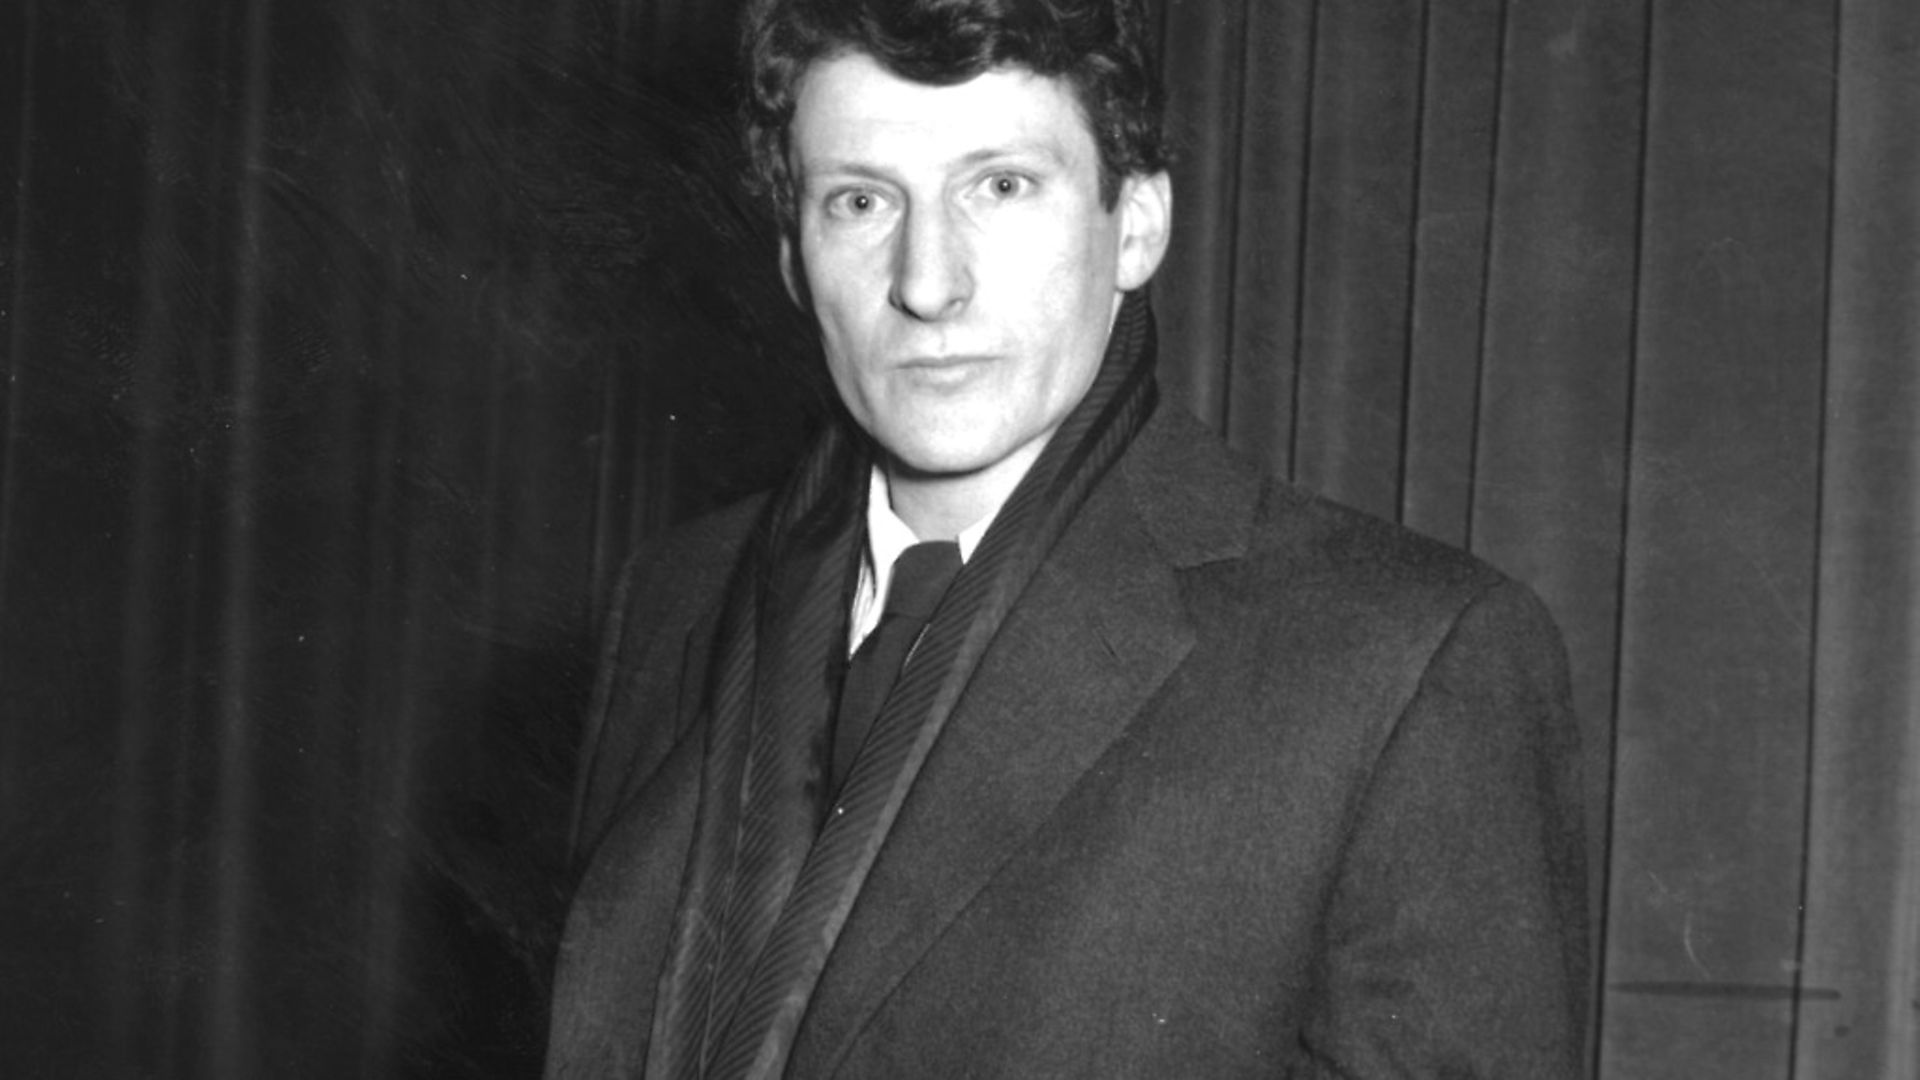 German-born British painter Lucian Freud. (Photo by Express Newspapers/Getty Images) - Credit: Getty Images